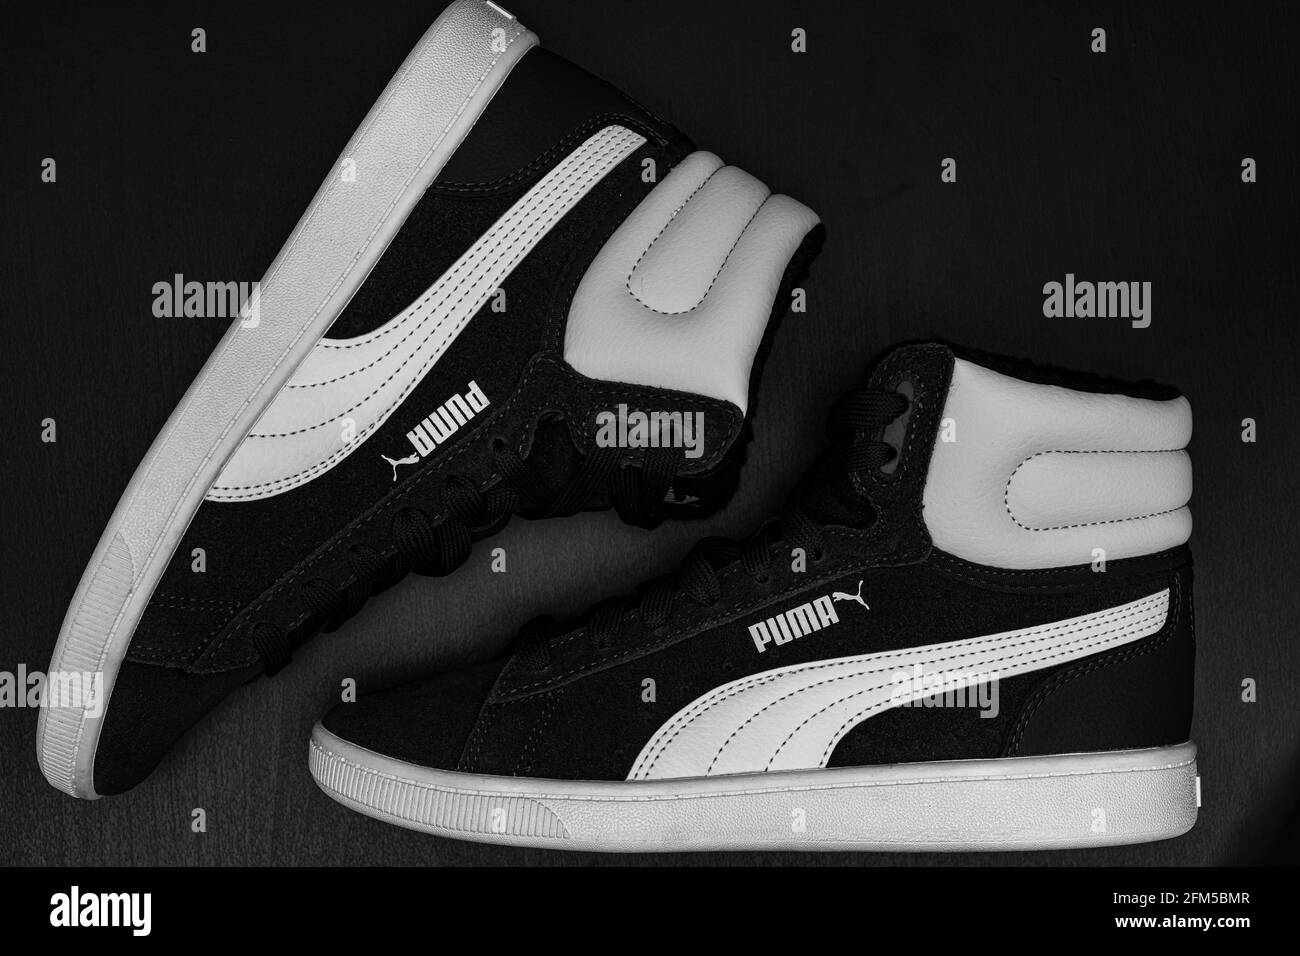 Shoes trainers puma Black and White Stock Photos & Images - Alamy